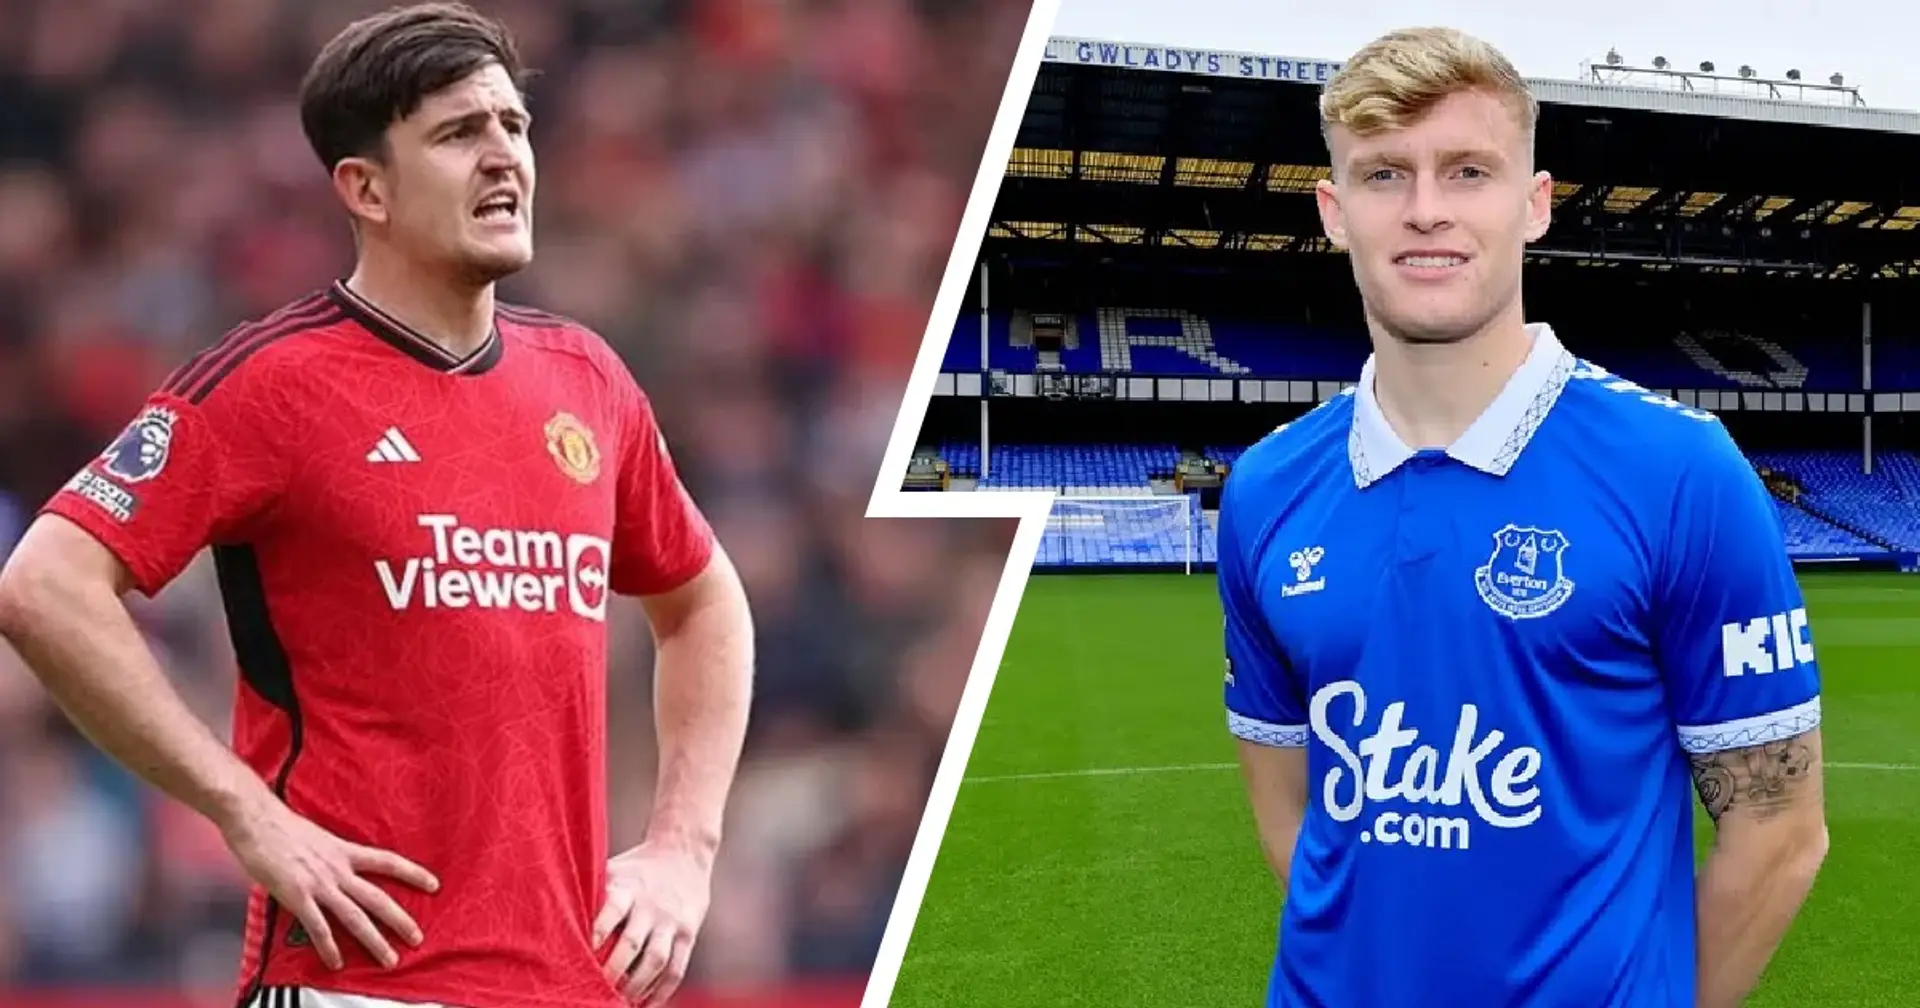 Man United could use Maguire as bait to sign Branthwaite - Football | Tribuna.com